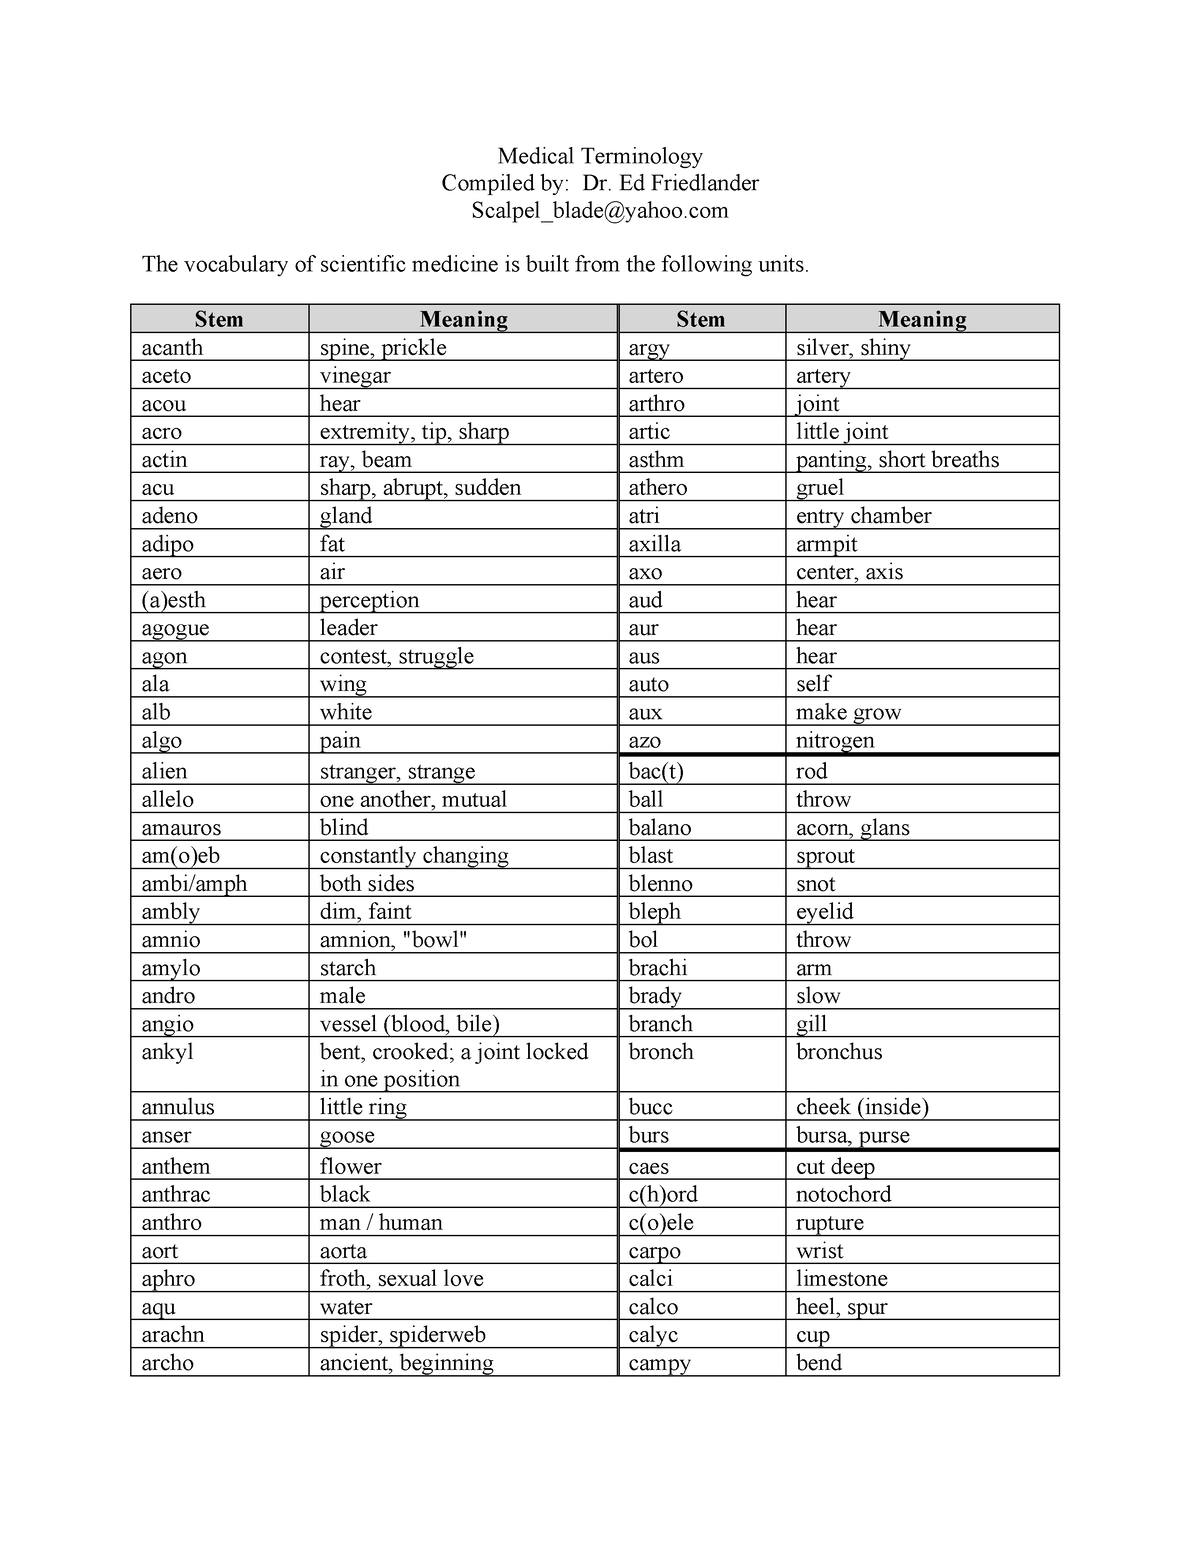 Medical Terminology list - Medical Terminology Compiled by: Dr. Ed ...